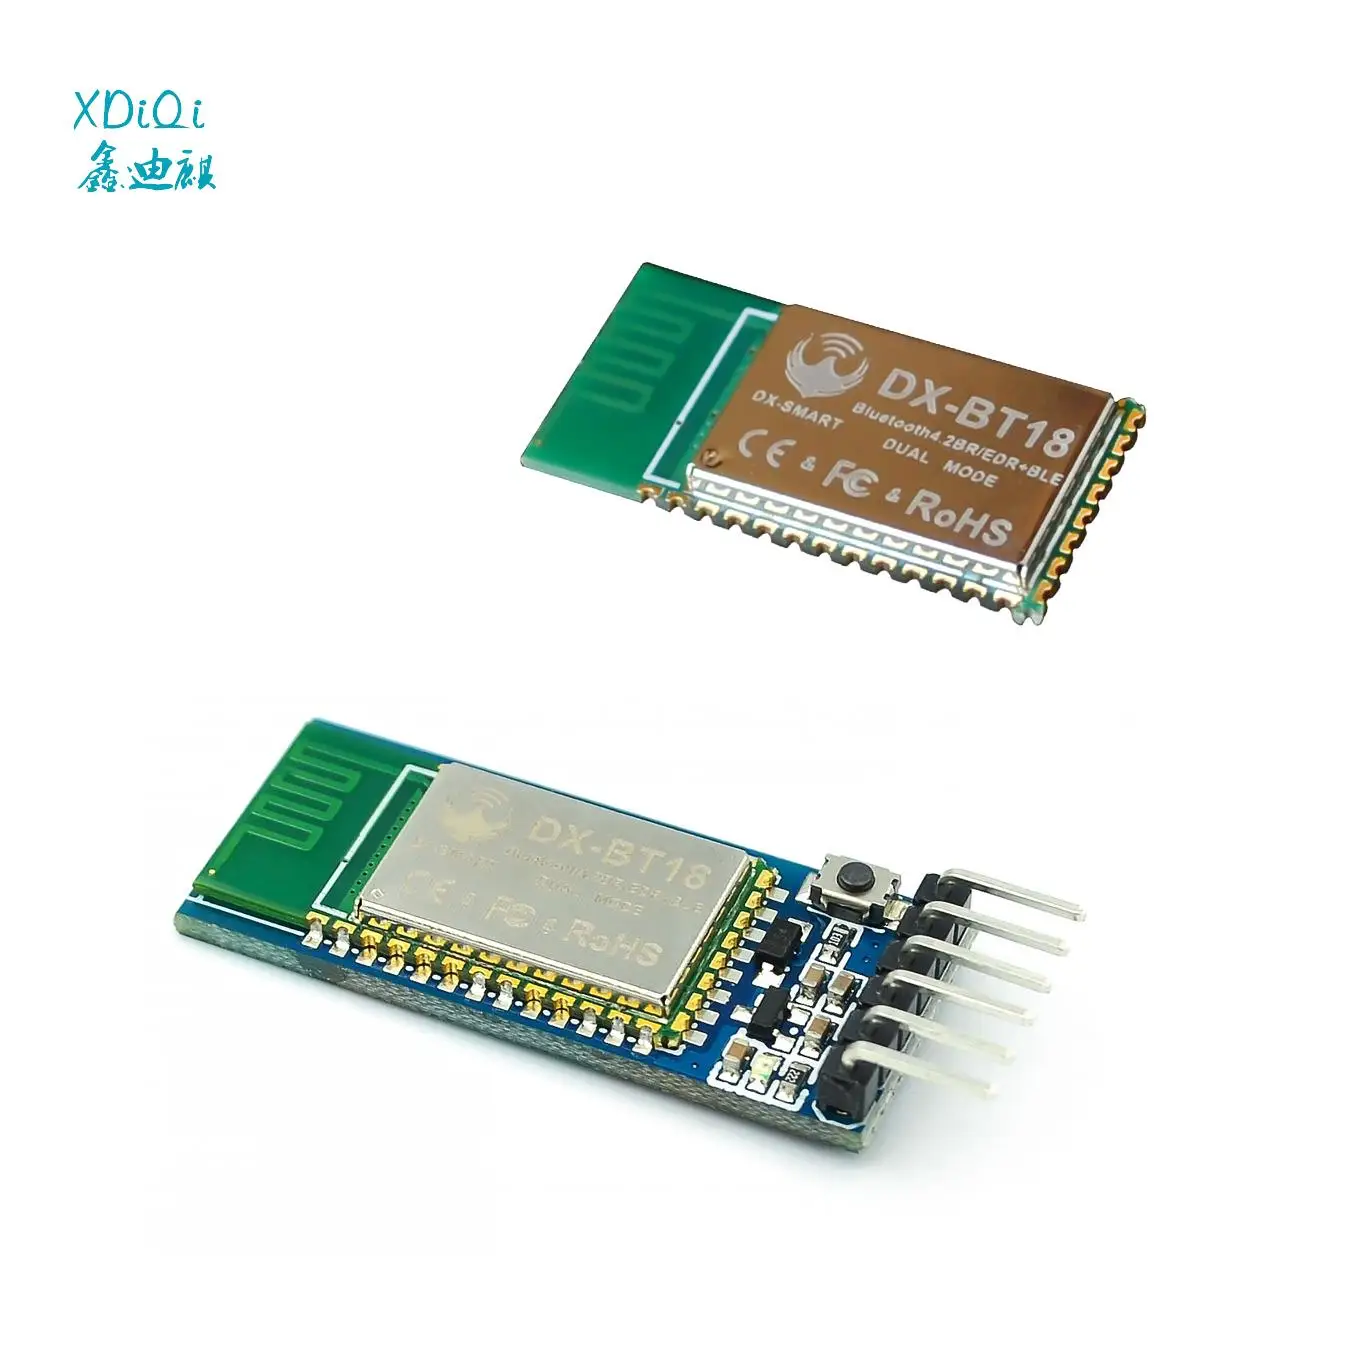 

DX-BT18 SPP2.0 Bluetooth module serial transmission BLE4.0 support Compatible with HC-05 HC-06